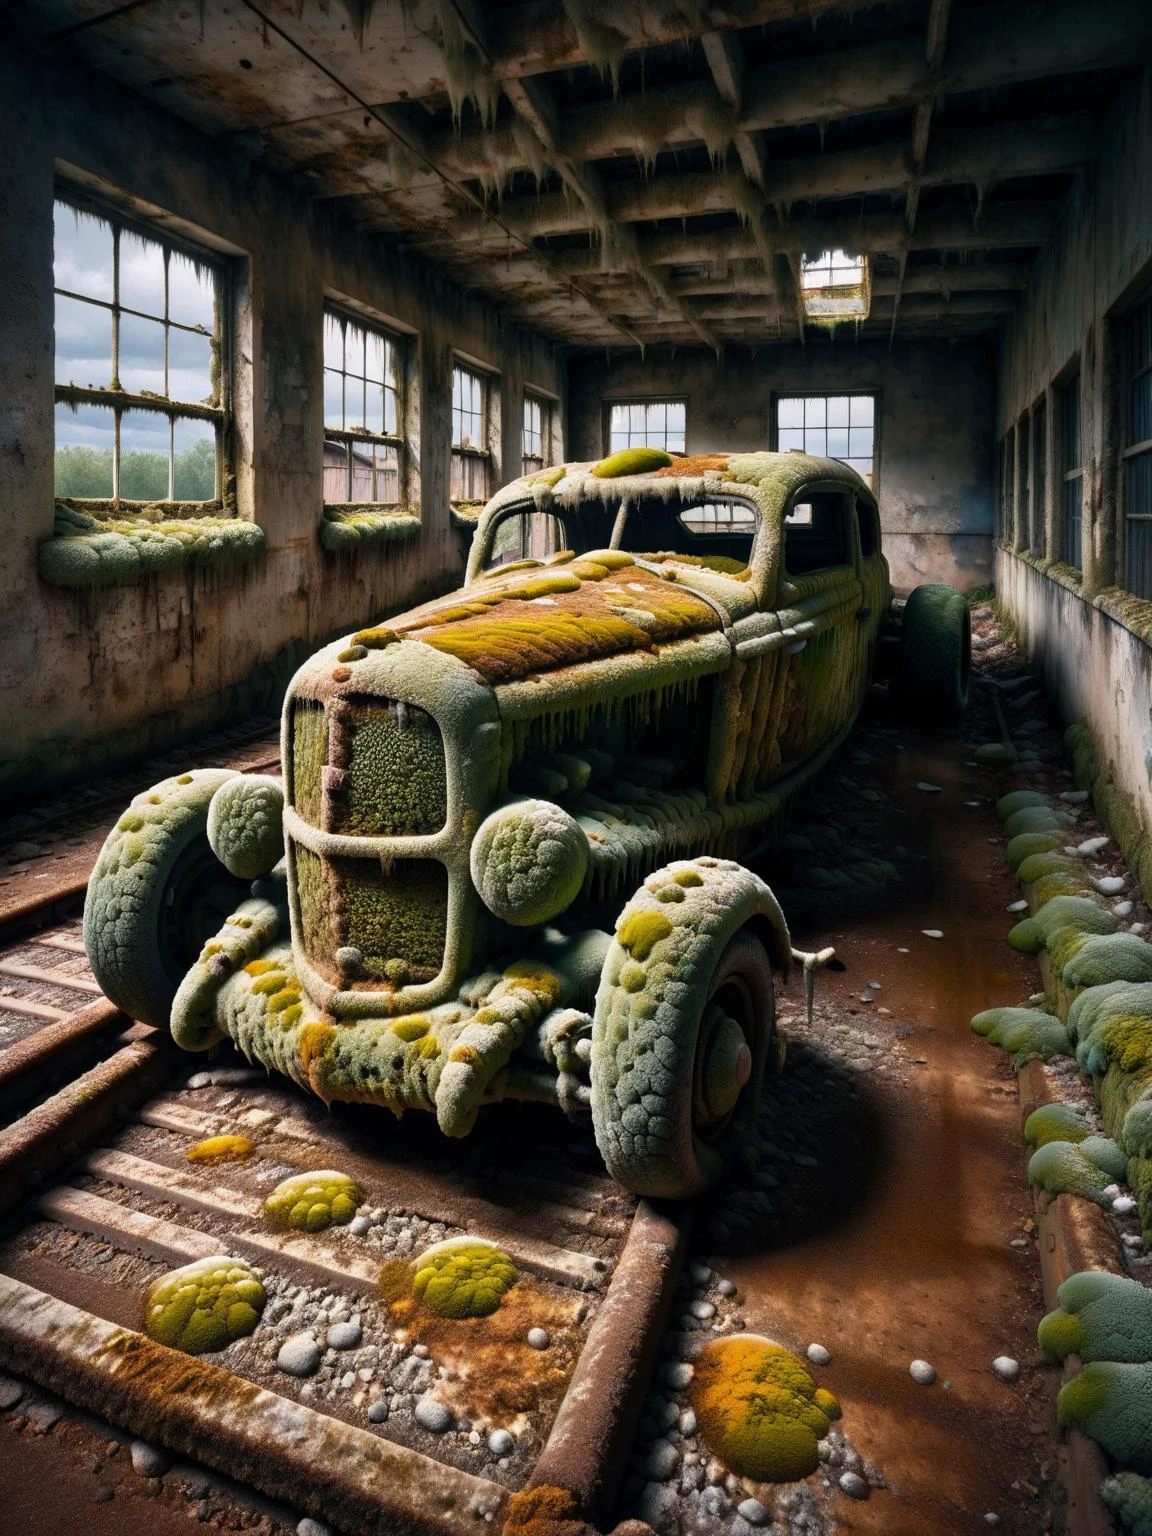 ral-mold, an F1 race car made entirely from ral-mold, parked on an abandoned track covered with litter, rusted buildings, rusted metal, a dark and brooding sky above giving an eerie scattered light elegant, dynamic, cinematic, HDR, shot with a Sony A7R IV for a crisp, detailed finish, 